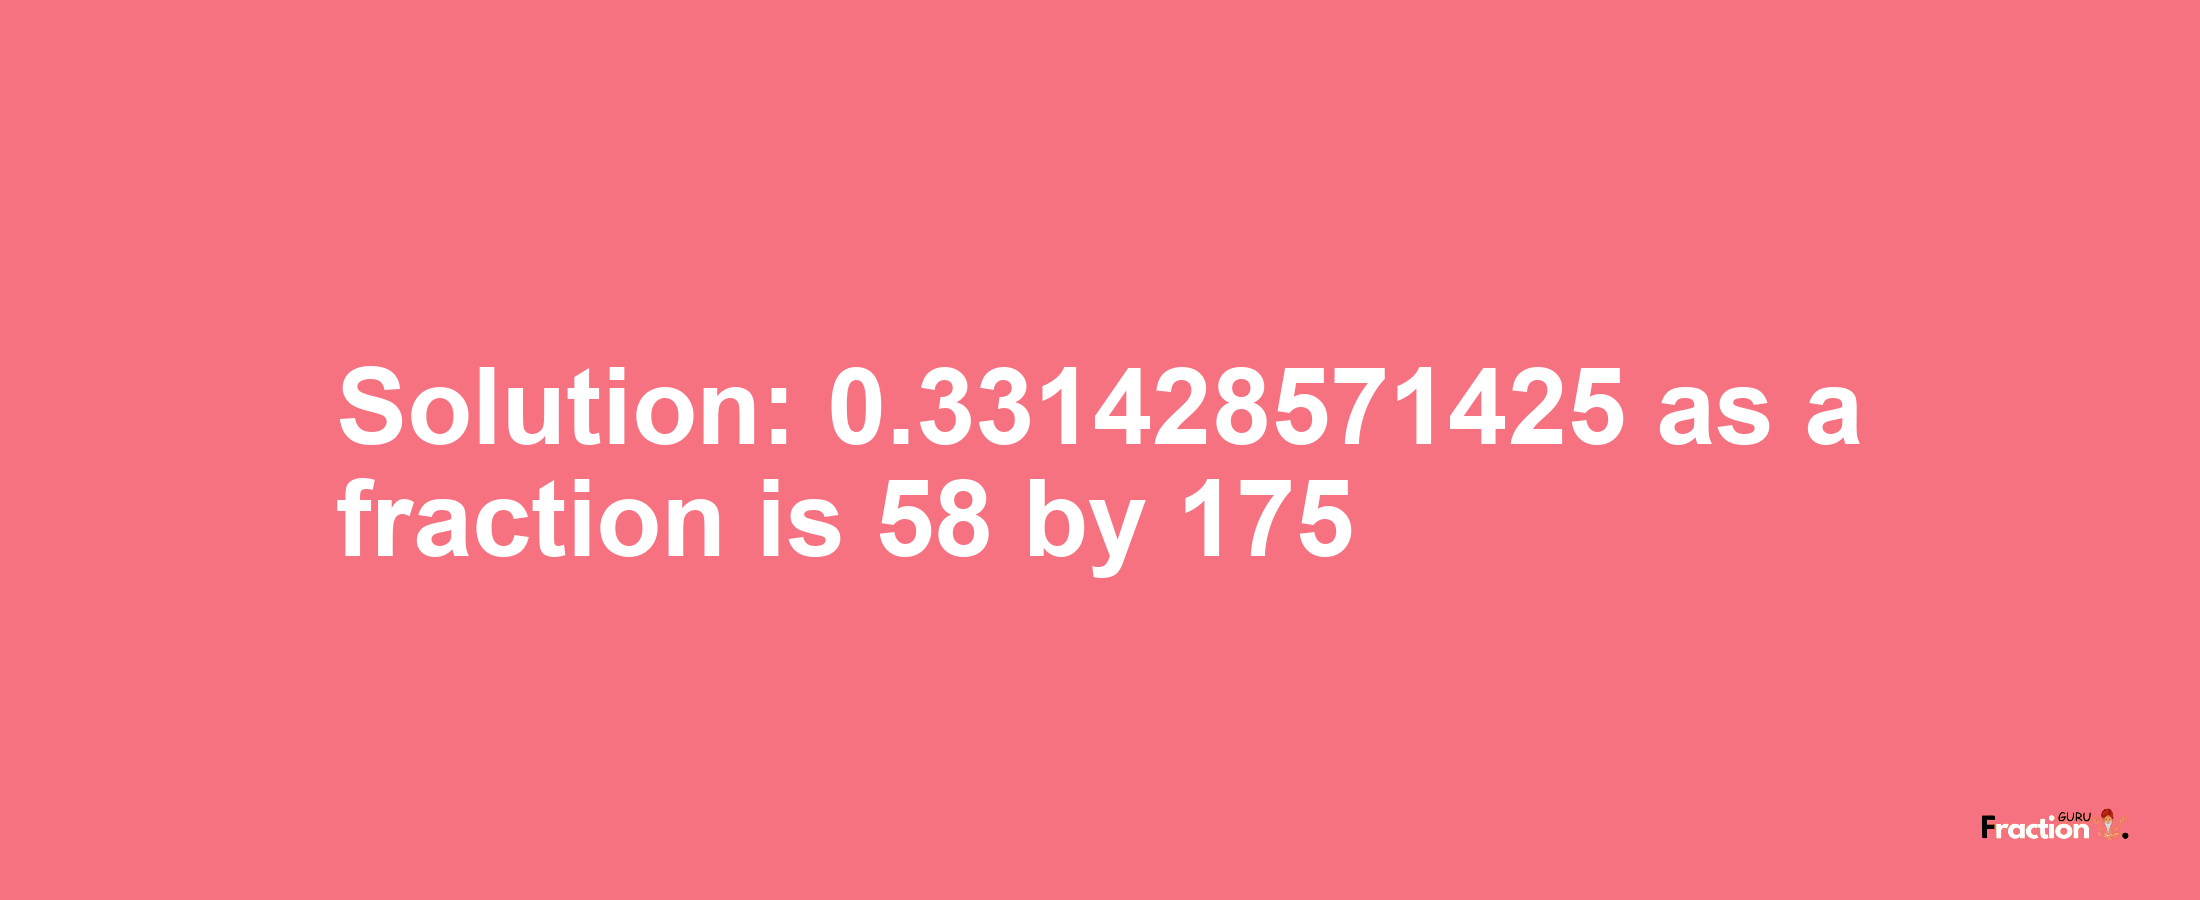 Solution:0.331428571425 as a fraction is 58/175